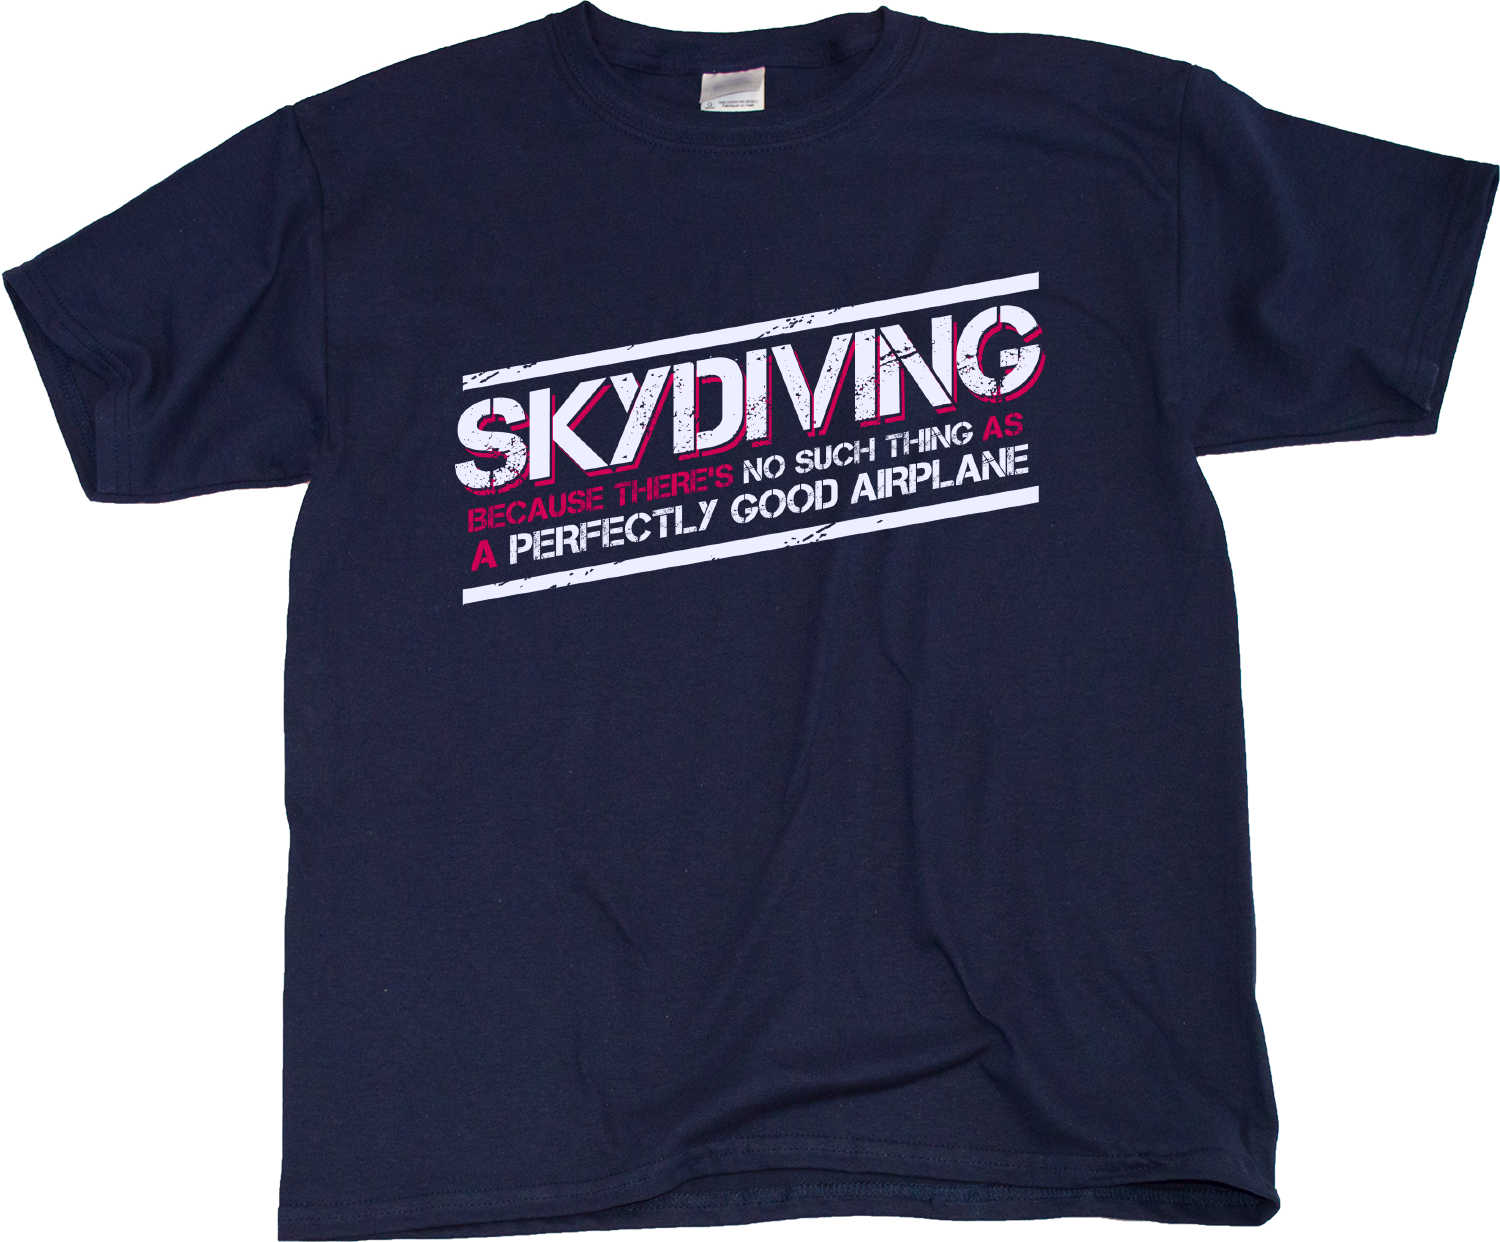 Youth Navy Skydiving: No Such Thing As Perfectly Good Airplane - Daredevil T-shirt